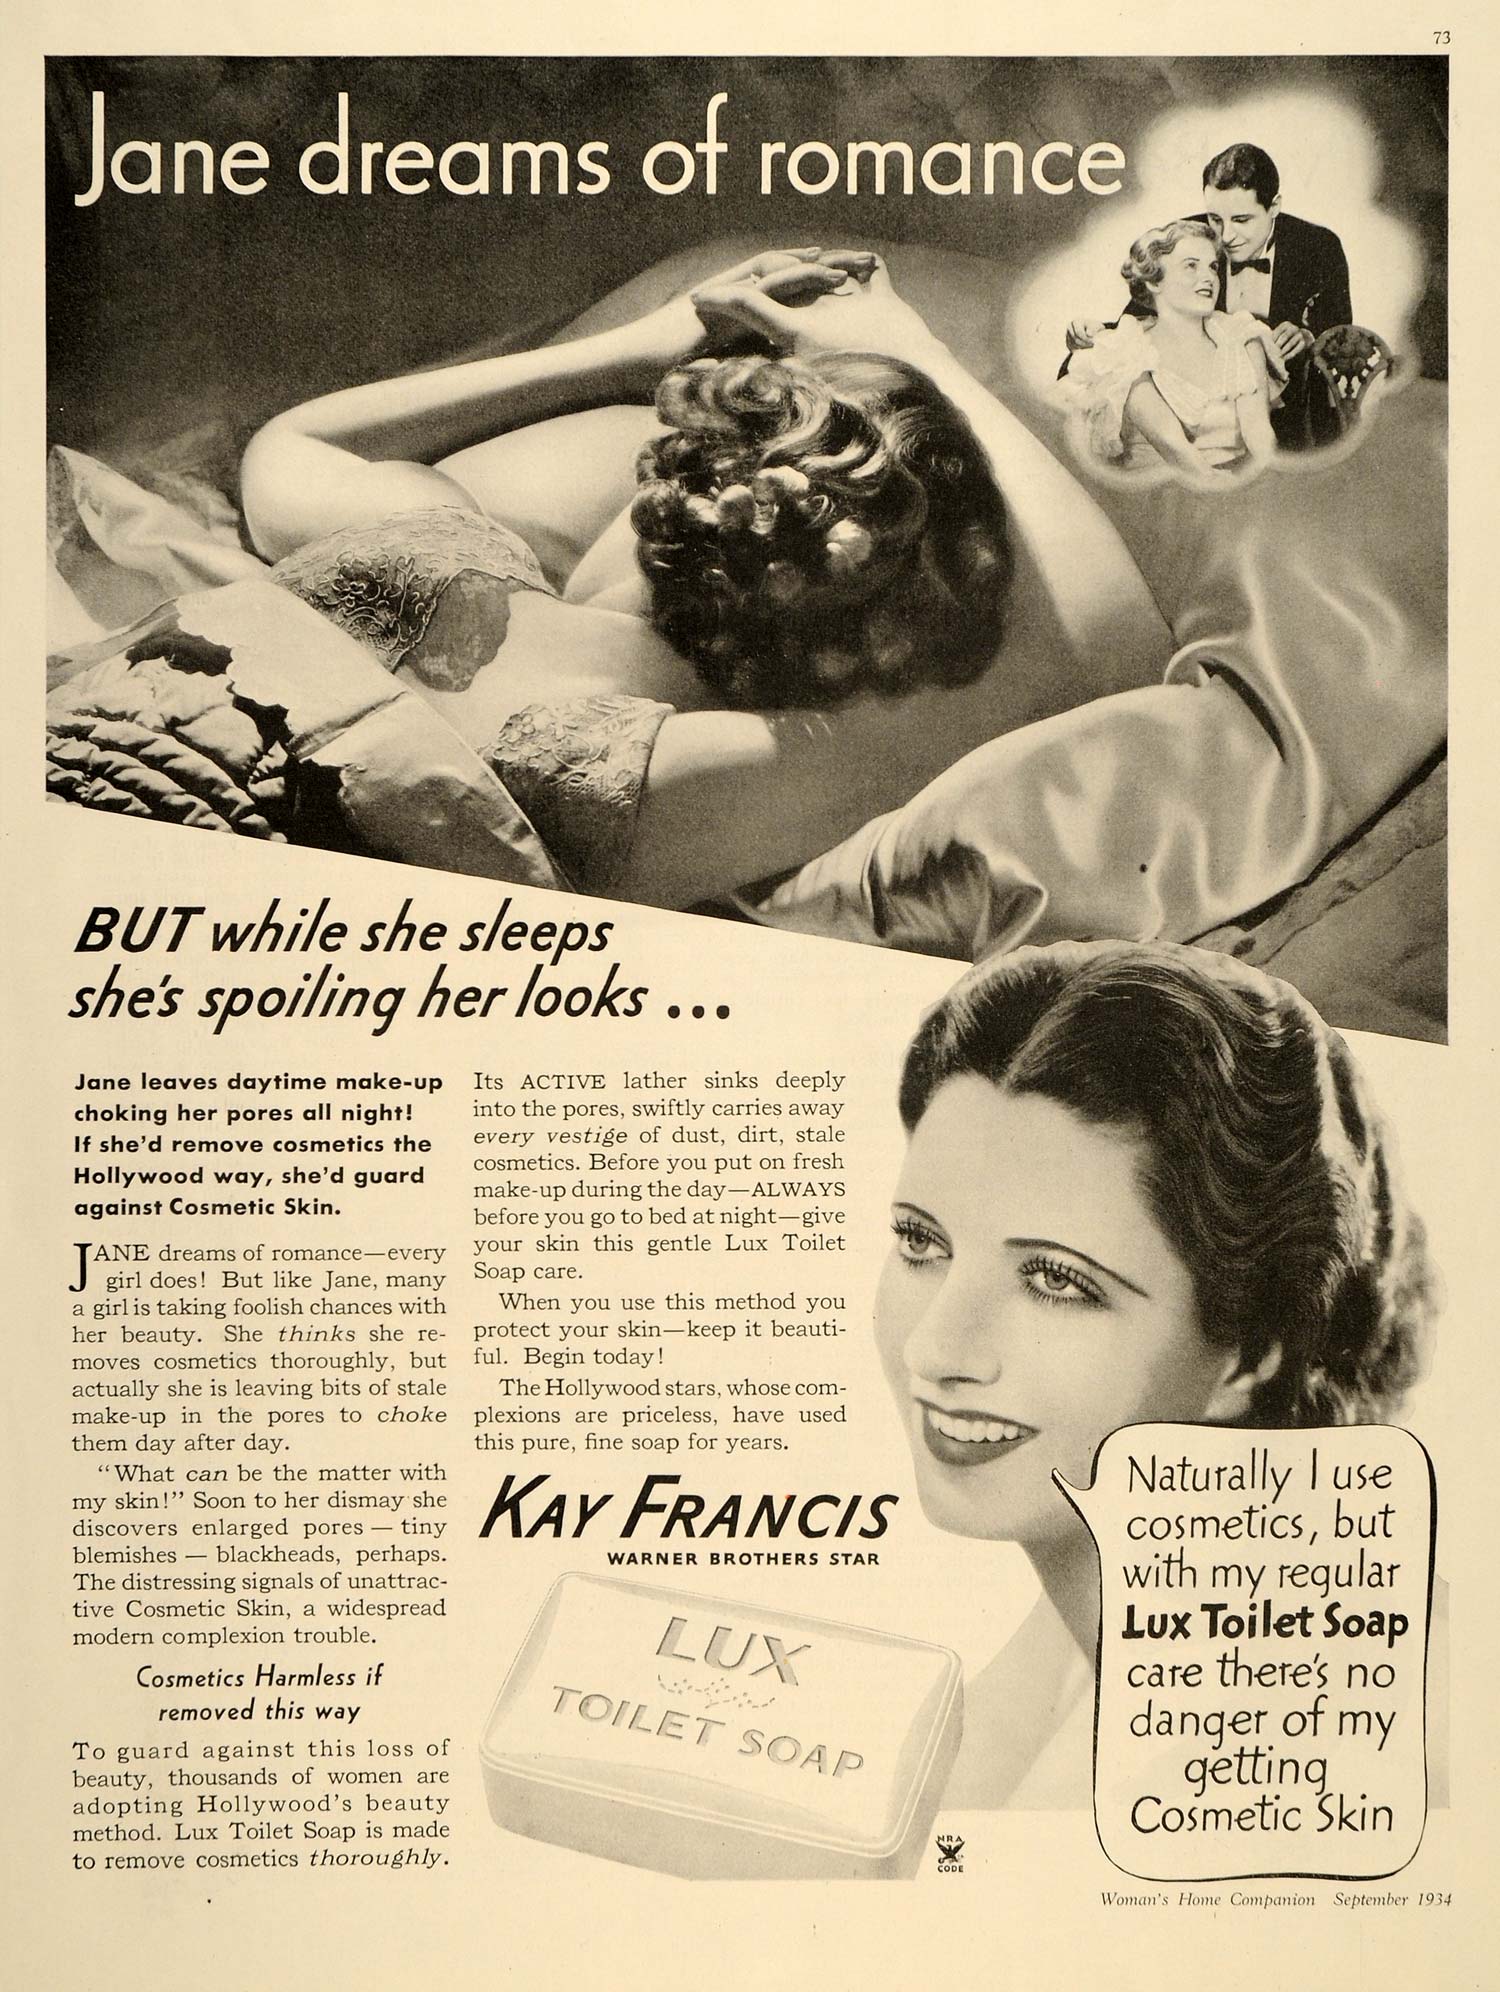 1934 Ad Lux Toilet Soap Cosmetic Skin Kay Francis Star - ORIGINAL WH1